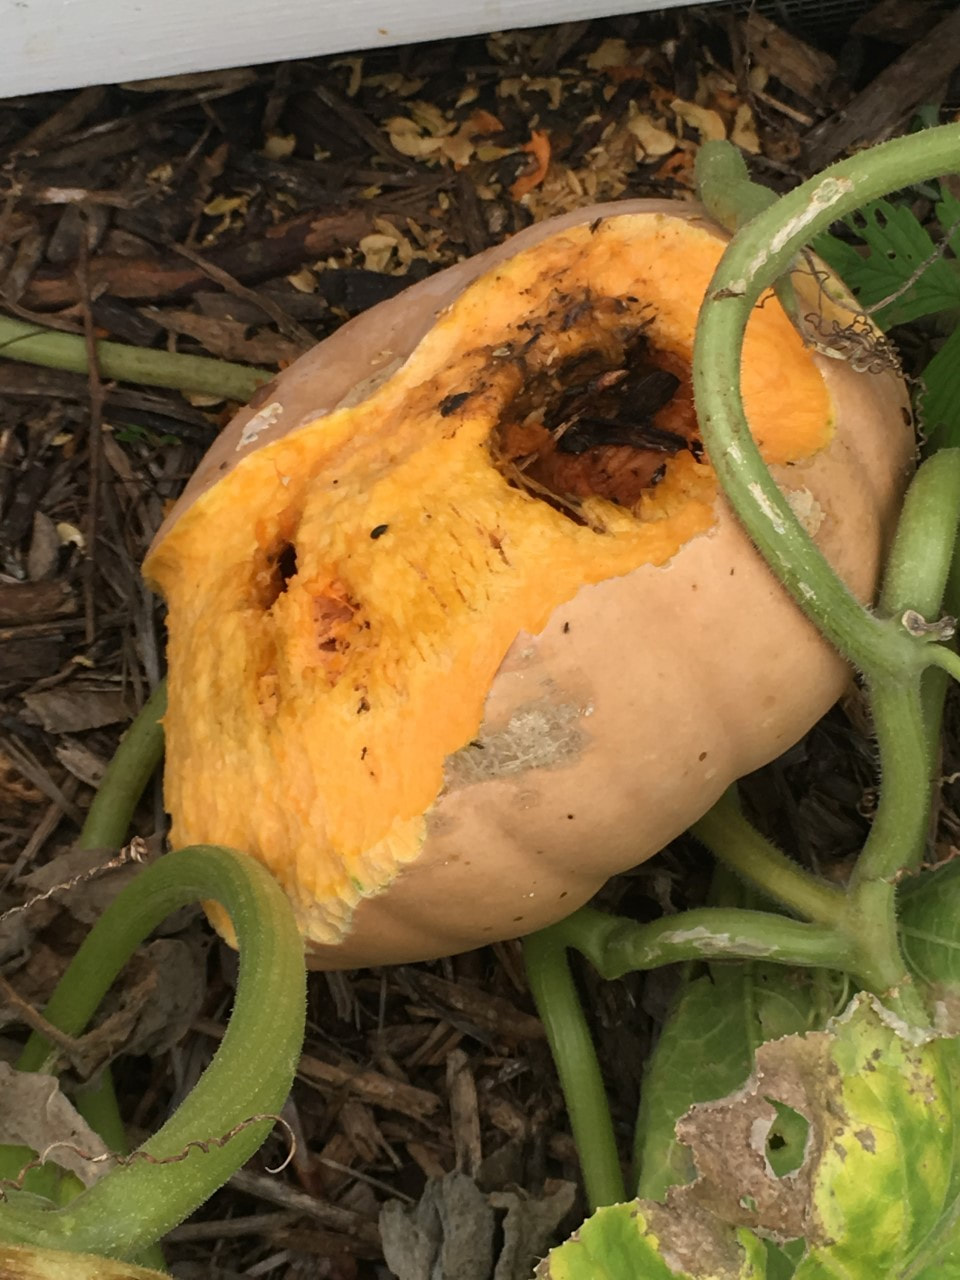 Long Island cheese squash with the bottom chewed up by voles